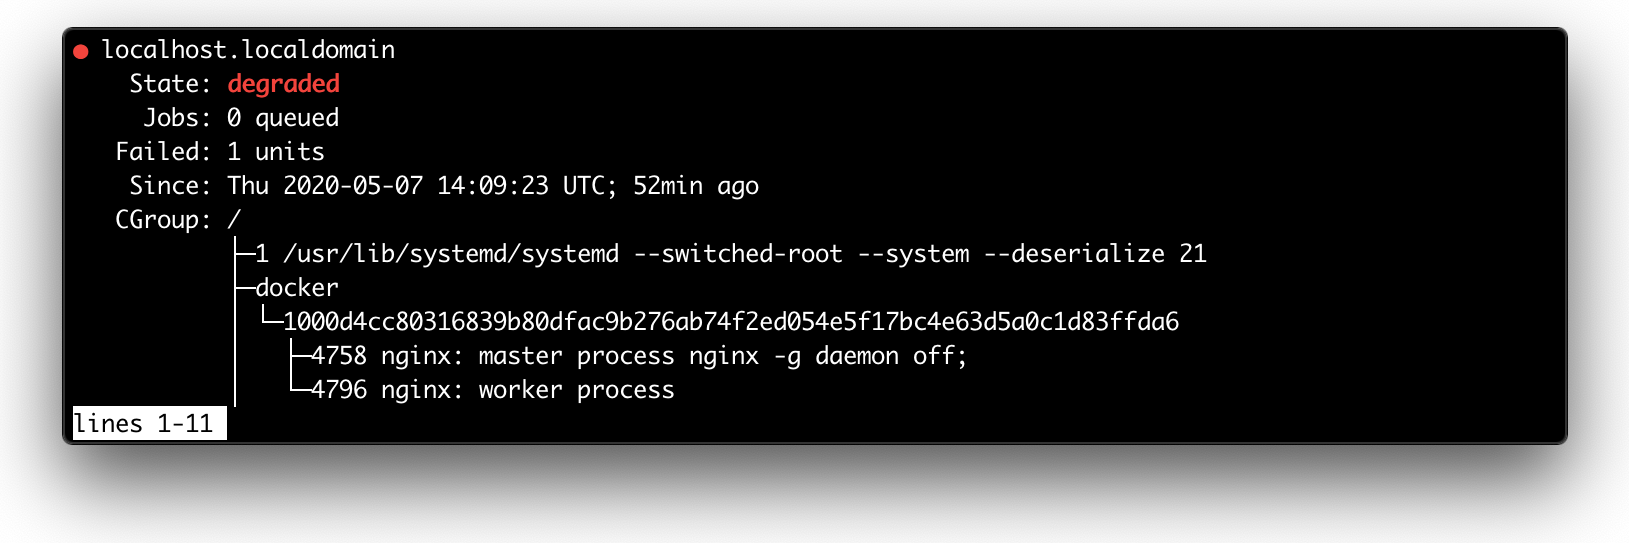 systemctl status output (excerpt)